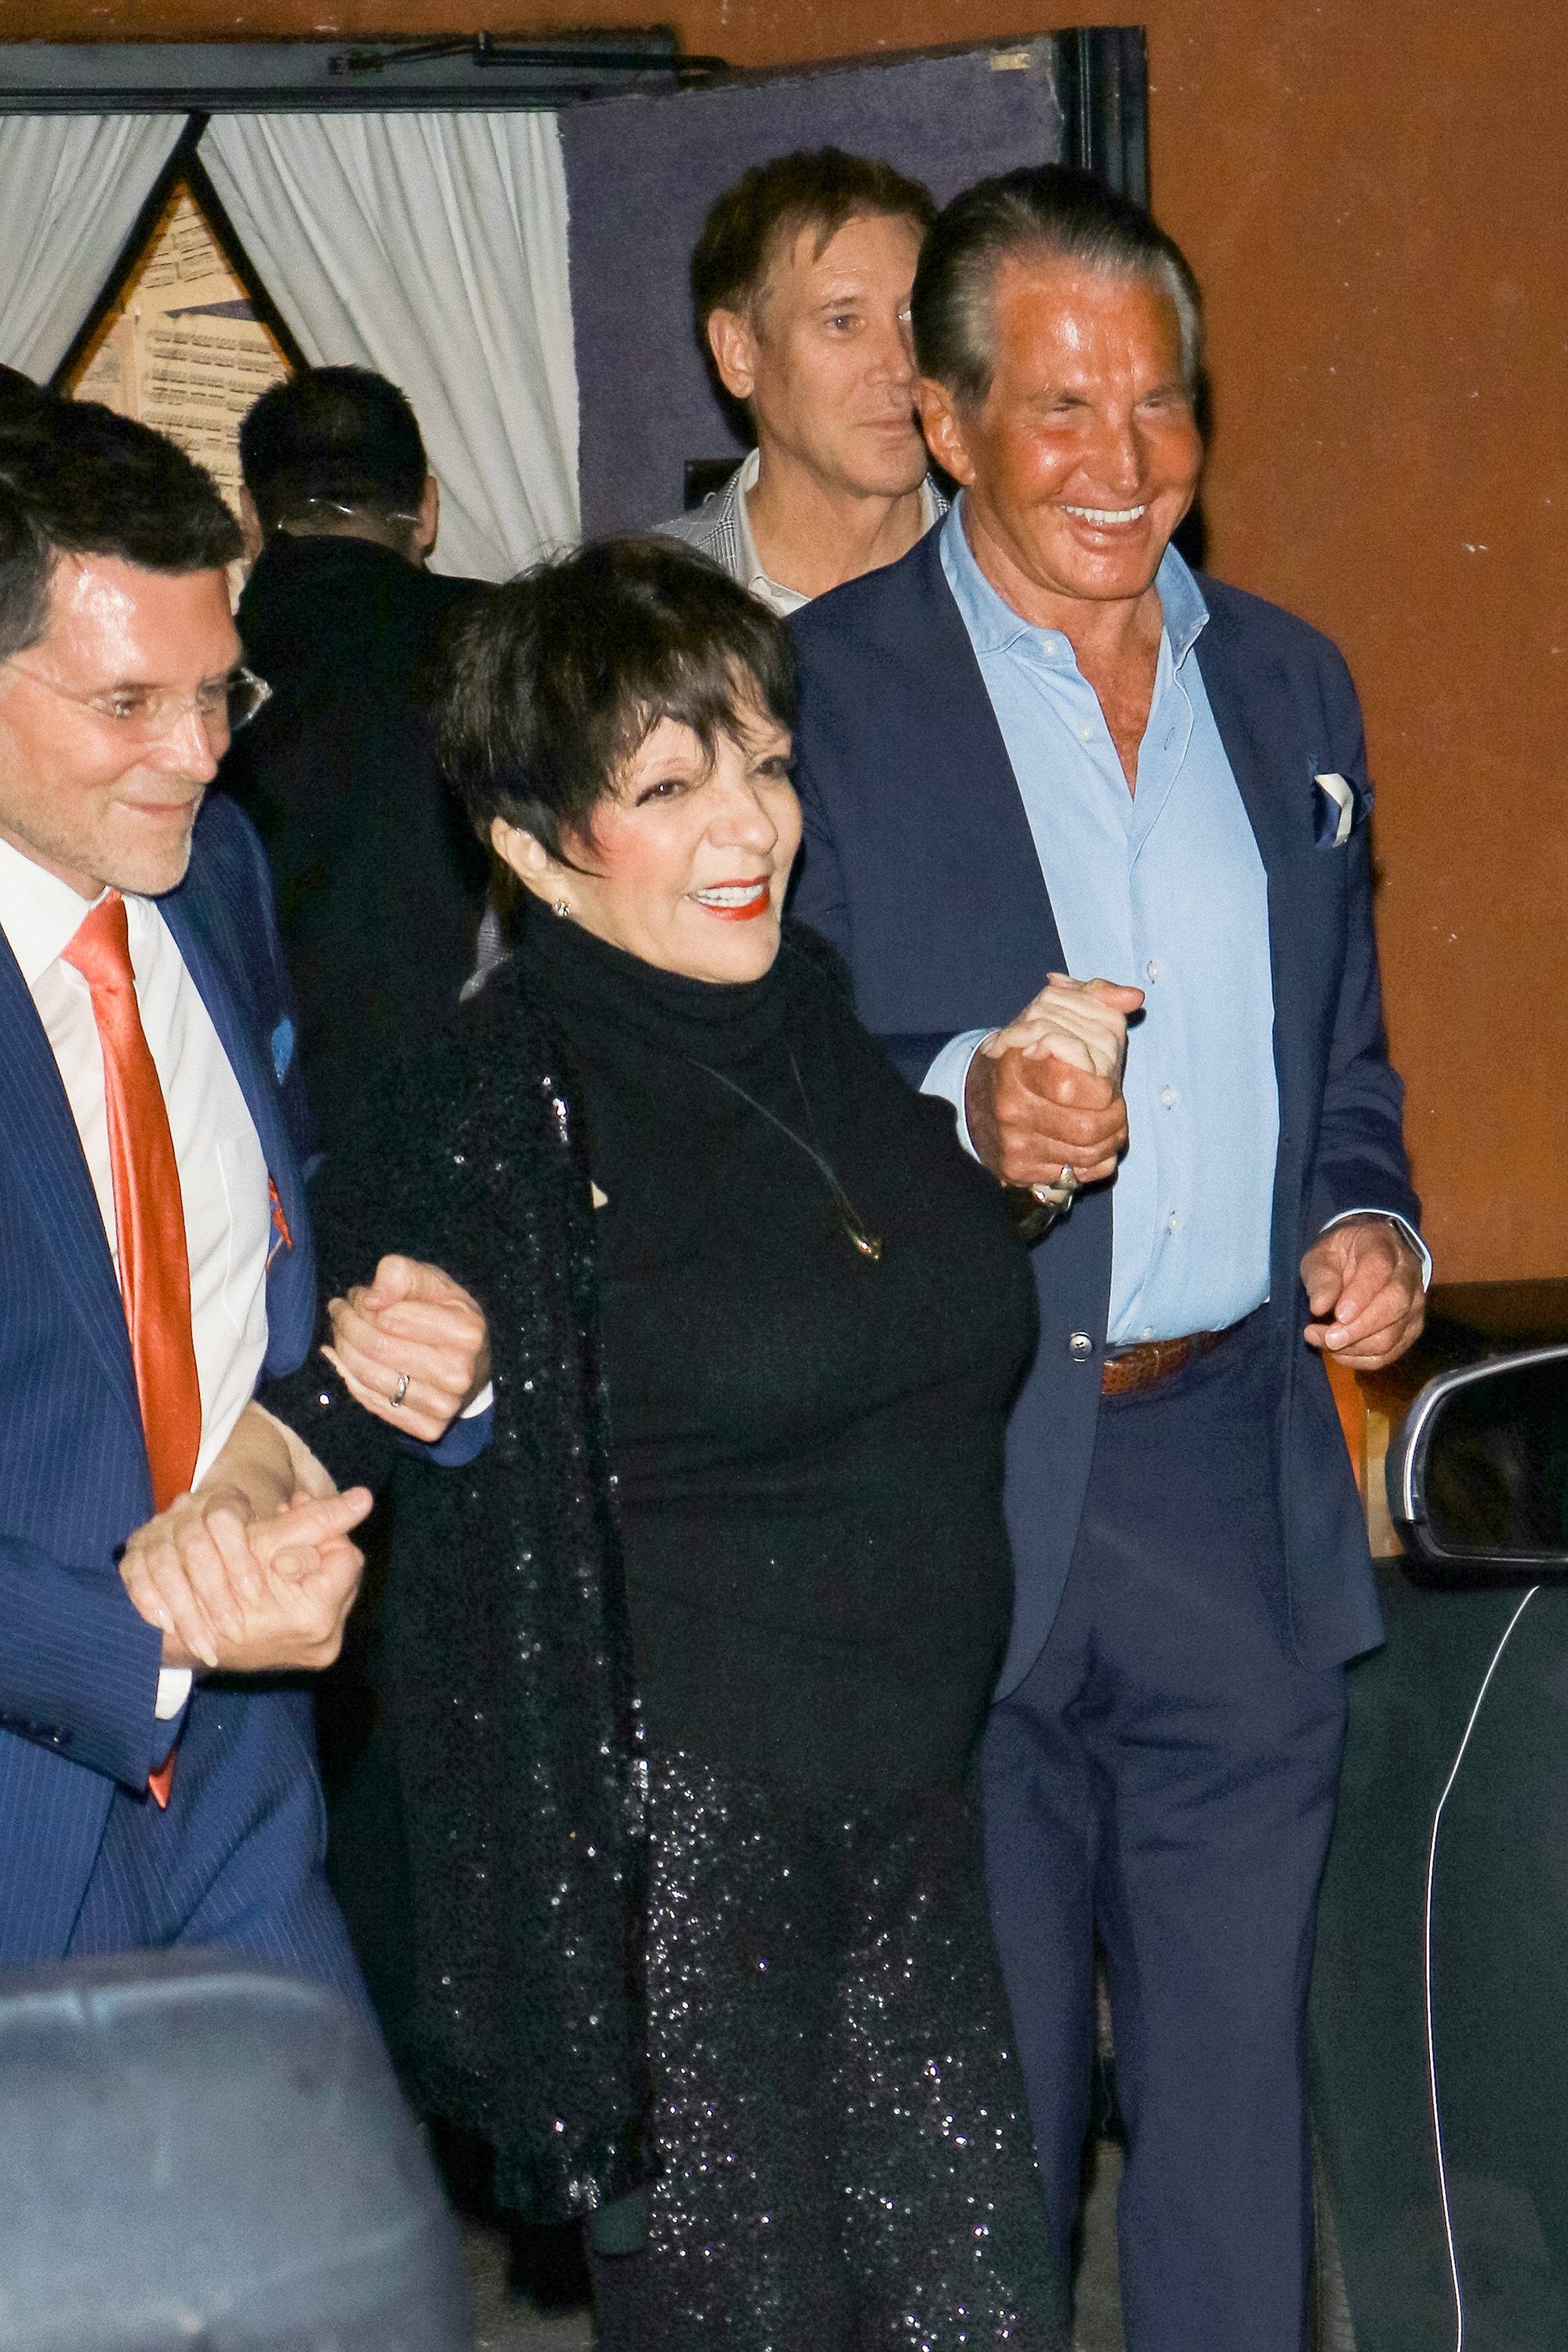 Liza Minnelli all smiles at dinner after Oscars 2022